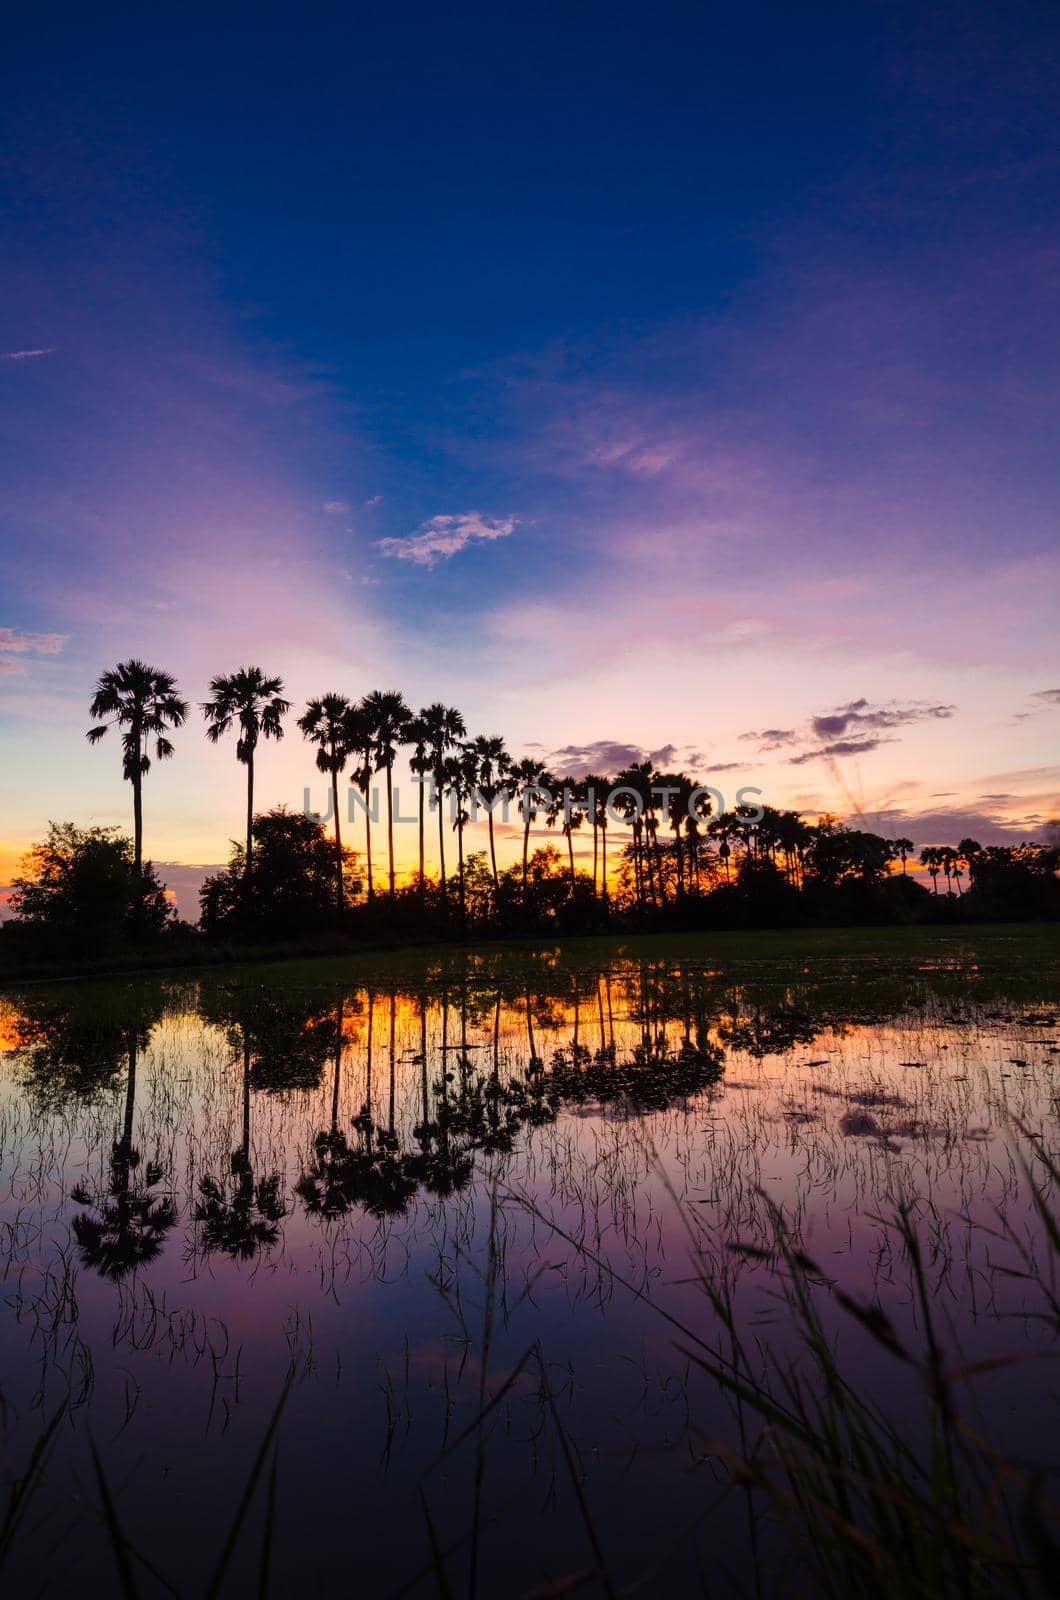 The silhouette of the toddy palms or sugar palm in the field with the colorful sky after sunset background